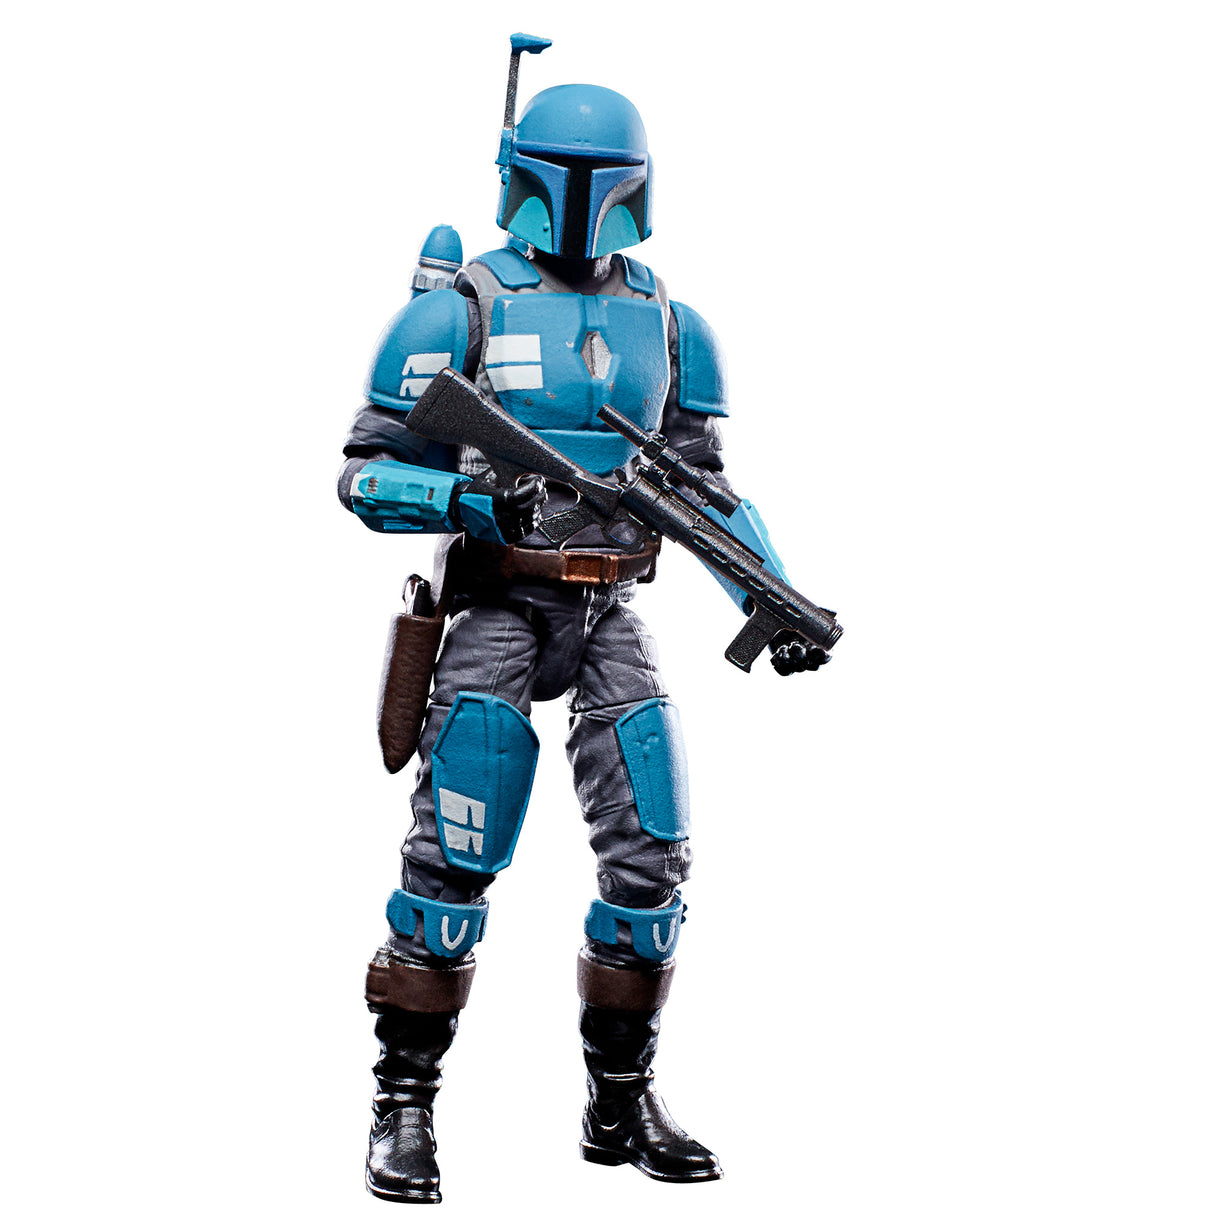 Star Wars The Vintage Collection - DW Mandalorian Action Figure (3.75-inch)